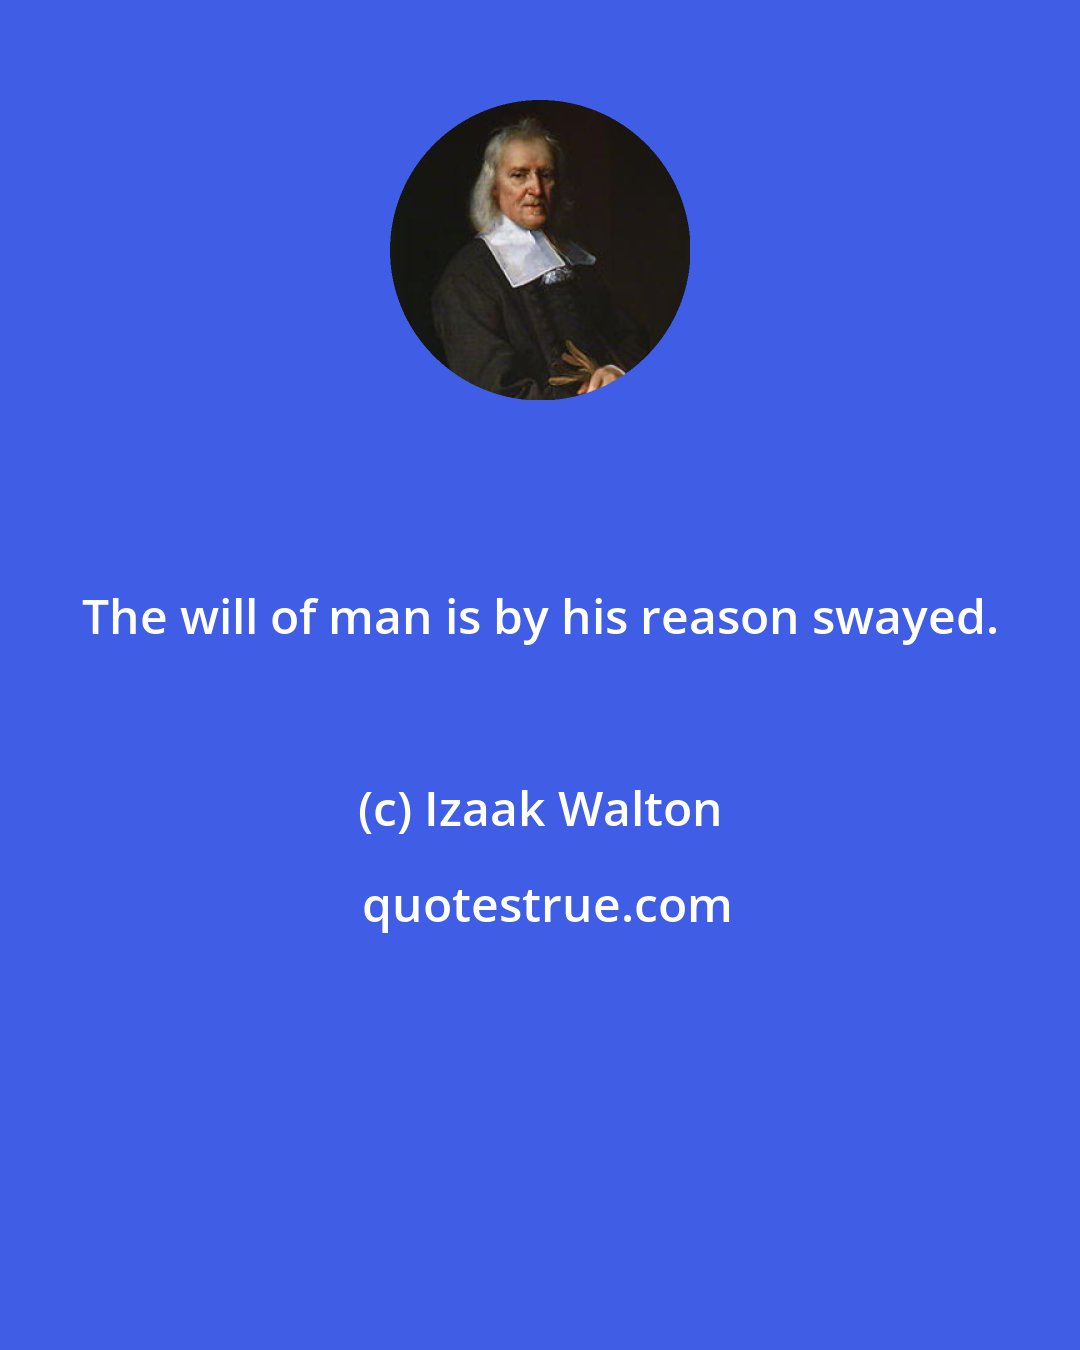 Izaak Walton: The will of man is by his reason swayed.